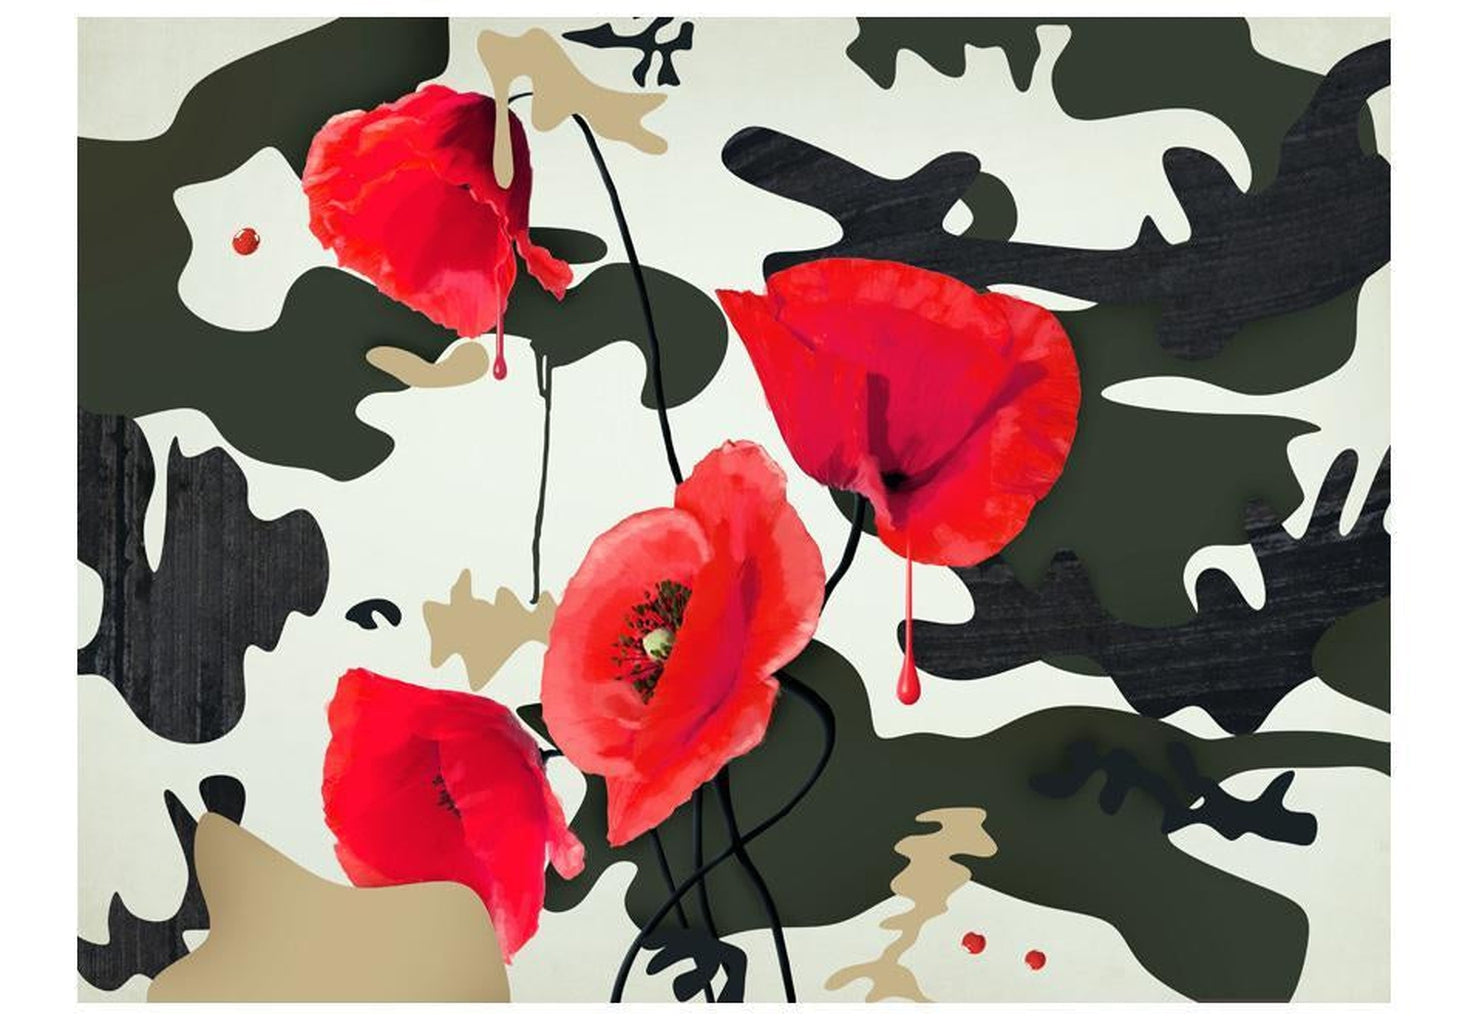 Wall mural - The flowers of war-TipTopHomeDecor